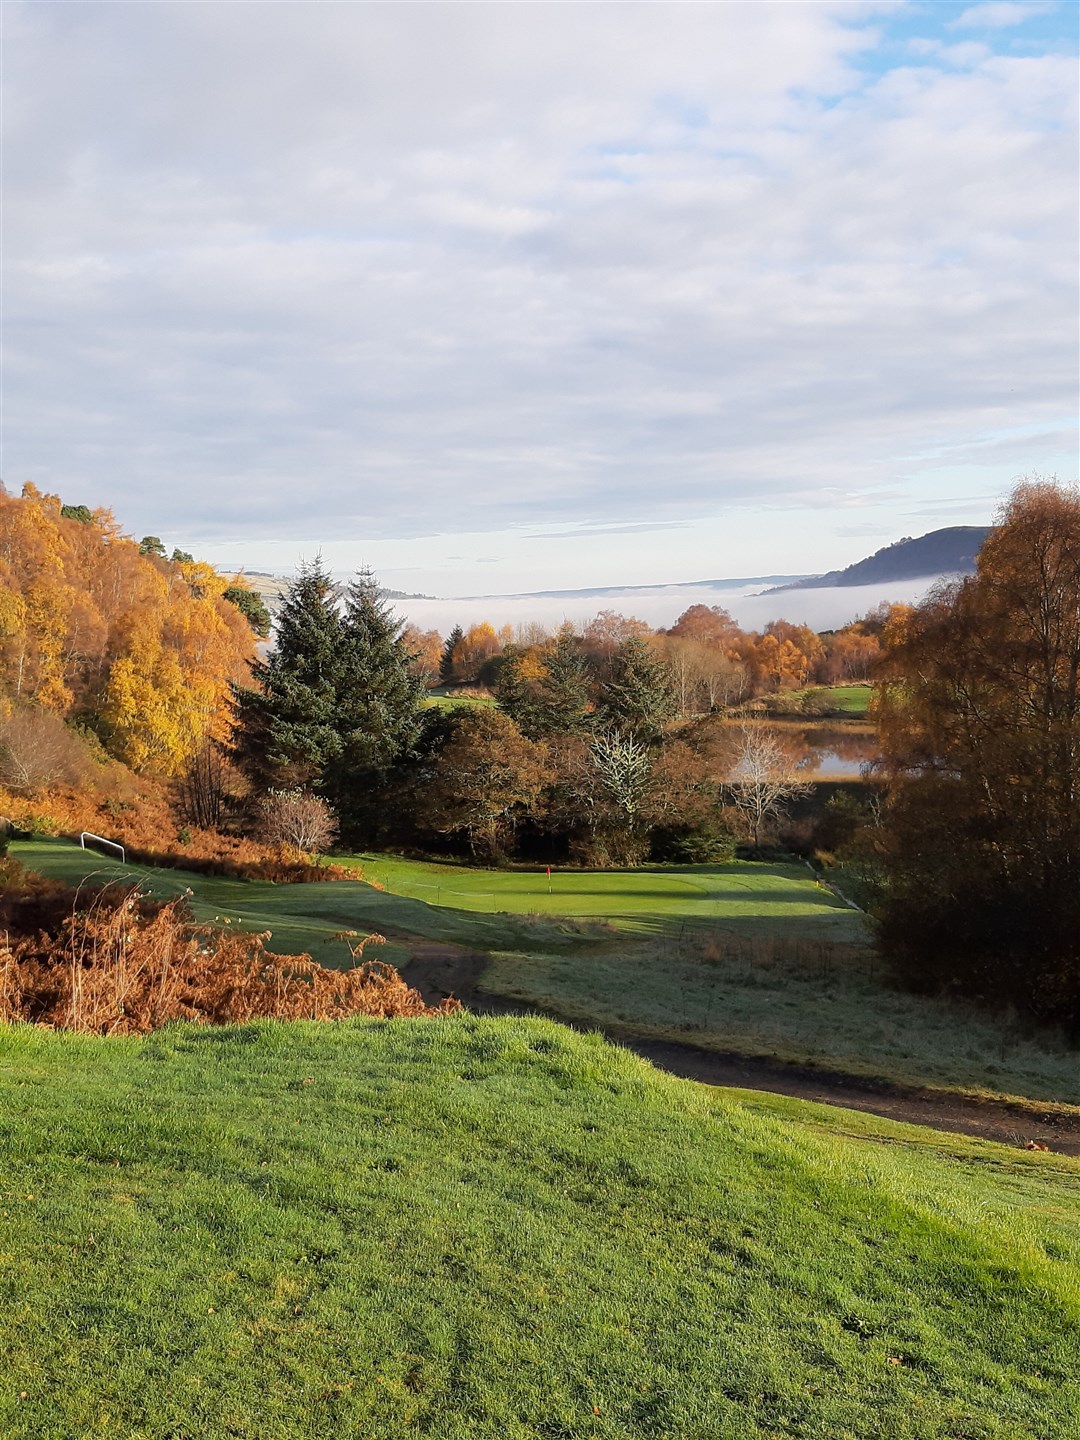 Strathpeffer Golf Club is offering a six-week block of lessons to women.